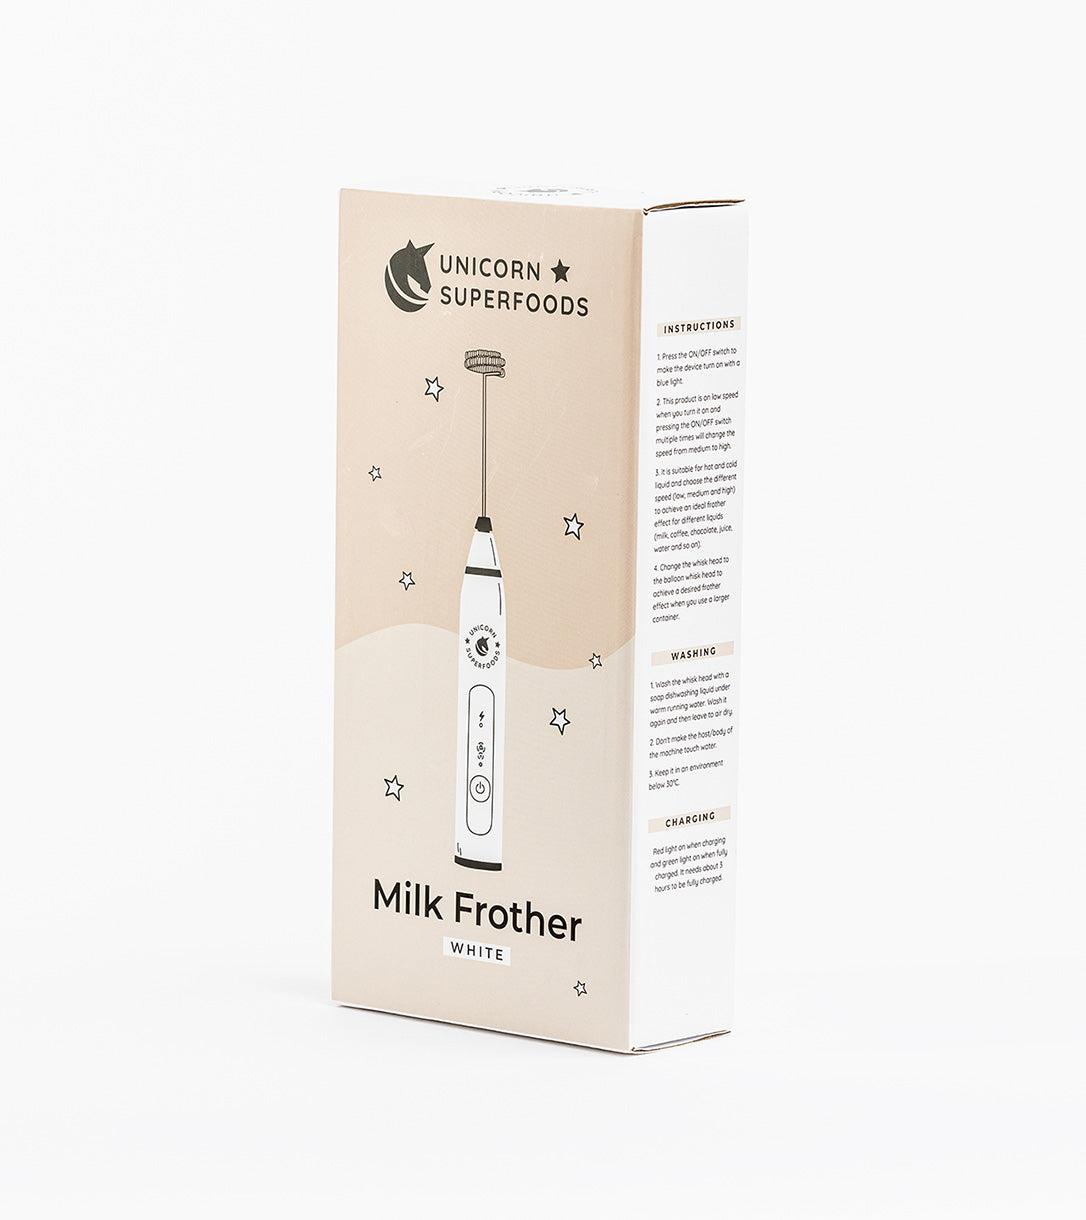 Milk Frother – withinUs Natural Health - US